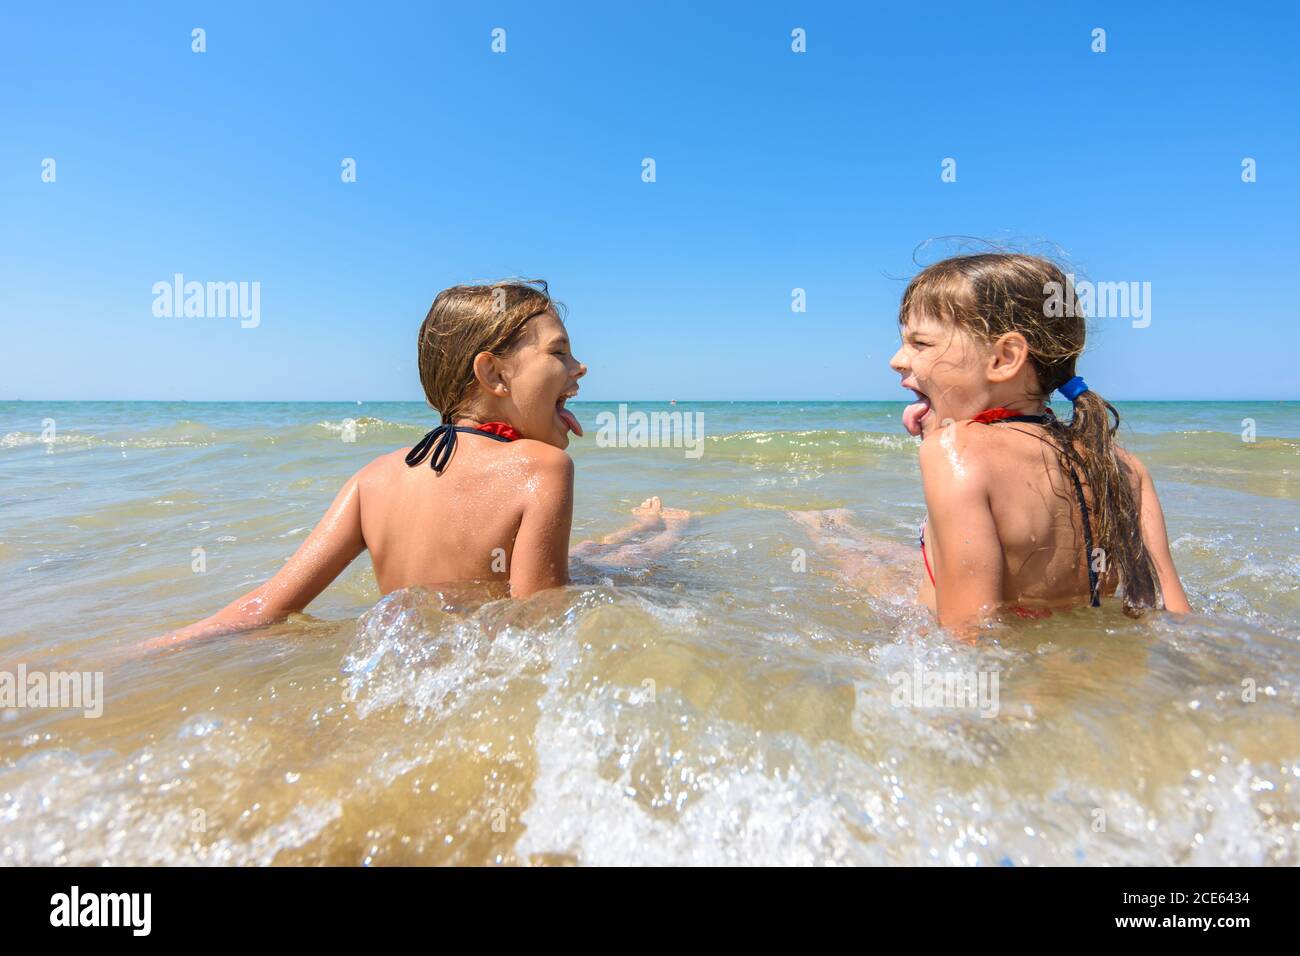 Children sit together in shallow water and show each other tongue Stock Photo